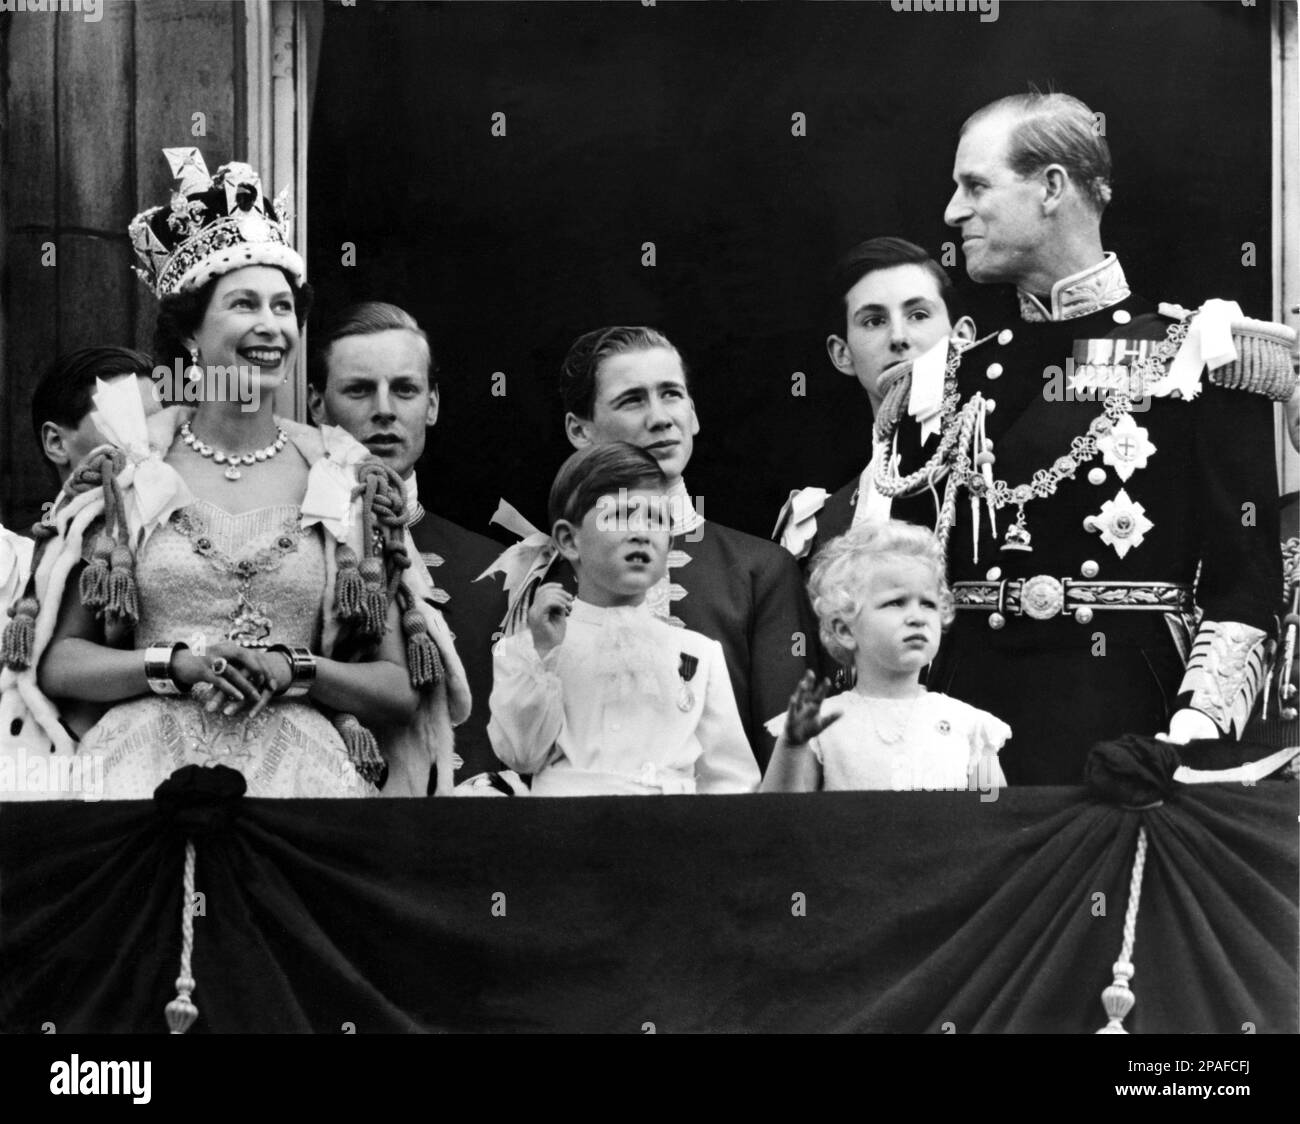 1953, 2 june , Buckingham Palace , London , England  : The  coronation day of Queen ELIZABETH  II of England ( born 1926 ). In this photo with  hausband prince PHILIP Mountbatten Duke of EDINBURGH ( born 1921 ),  the sons prince CHARLES of Wales (born 1948 ) and princess Royal ANNE ( born 1950 ). In backgrounds the son of Duke and Duchesse Marina of KENT : EDWARD Duke of Kent and prince MICHAEL of Kent   - REALI - ROYALTY - nobili - Nobiltà  - nobility - GRAND BRETAGNA - GREAT BRITAIN - INGHILTERRA - REGINA - WINDSOR - House of Saxe-Coburg-Gotha - celebrity personality celebrities personalitie Stock Photo